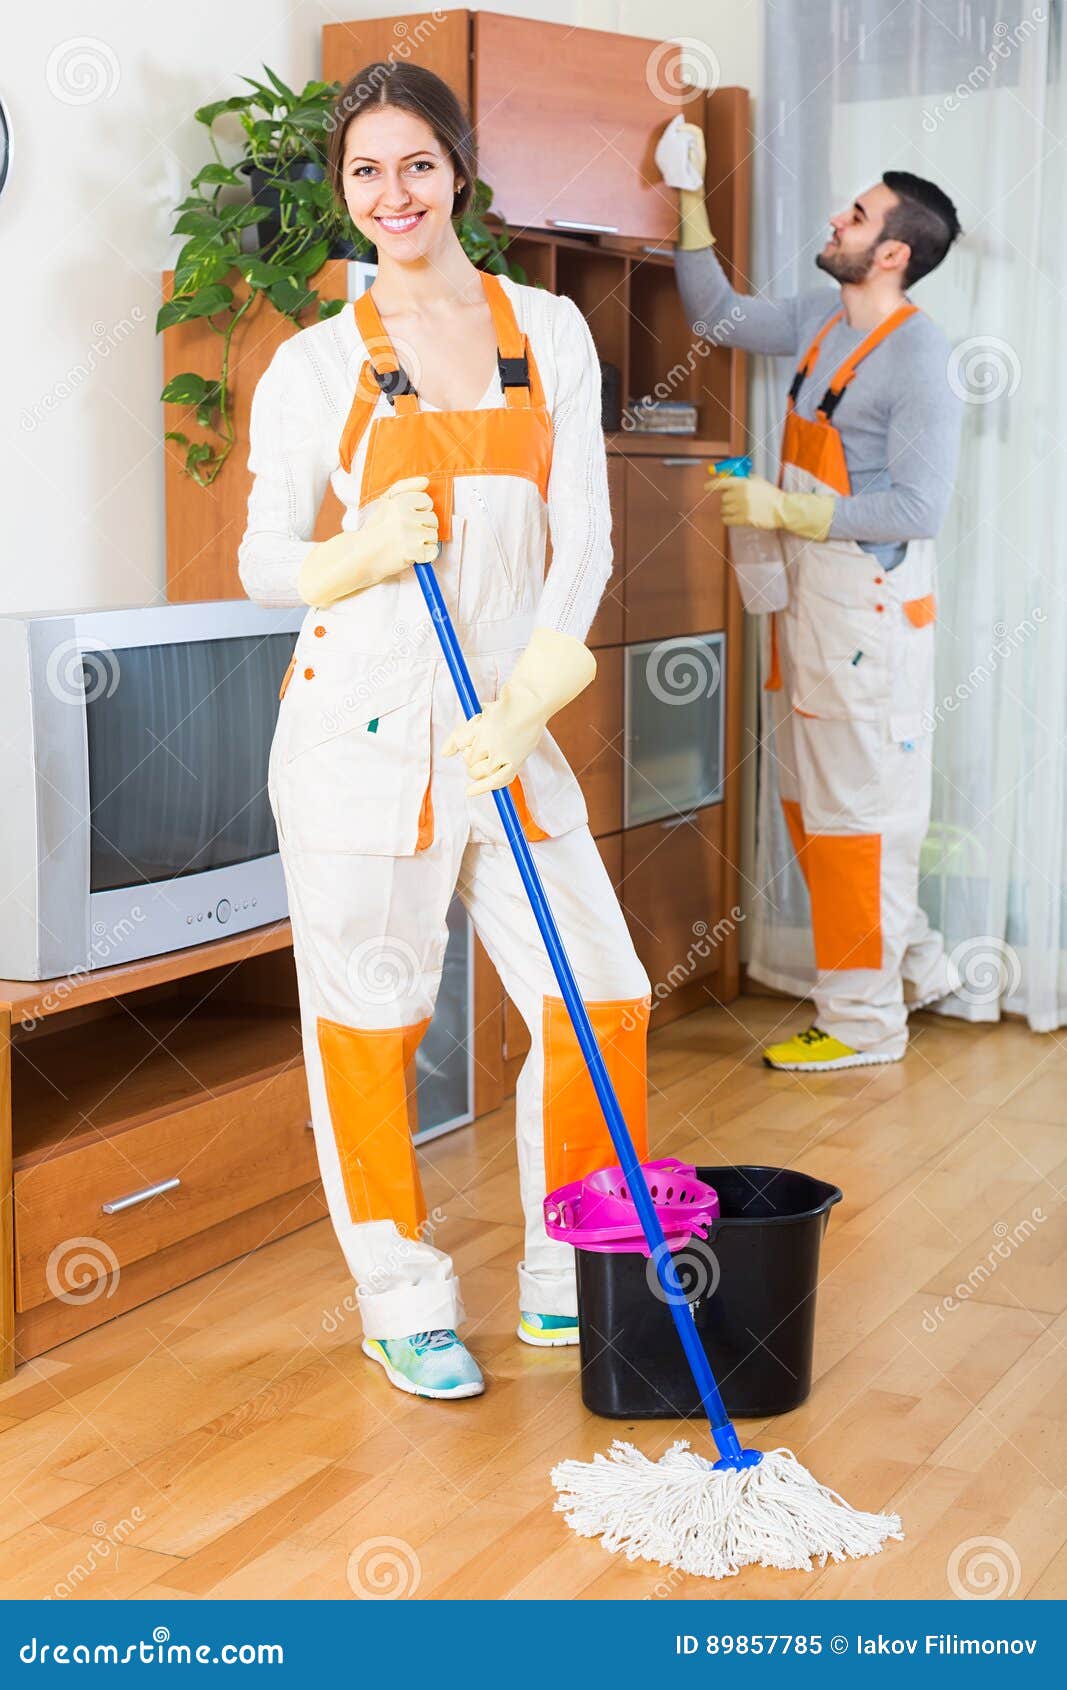 Cleaners cleaning in room stock image. Image of housework - 89857785